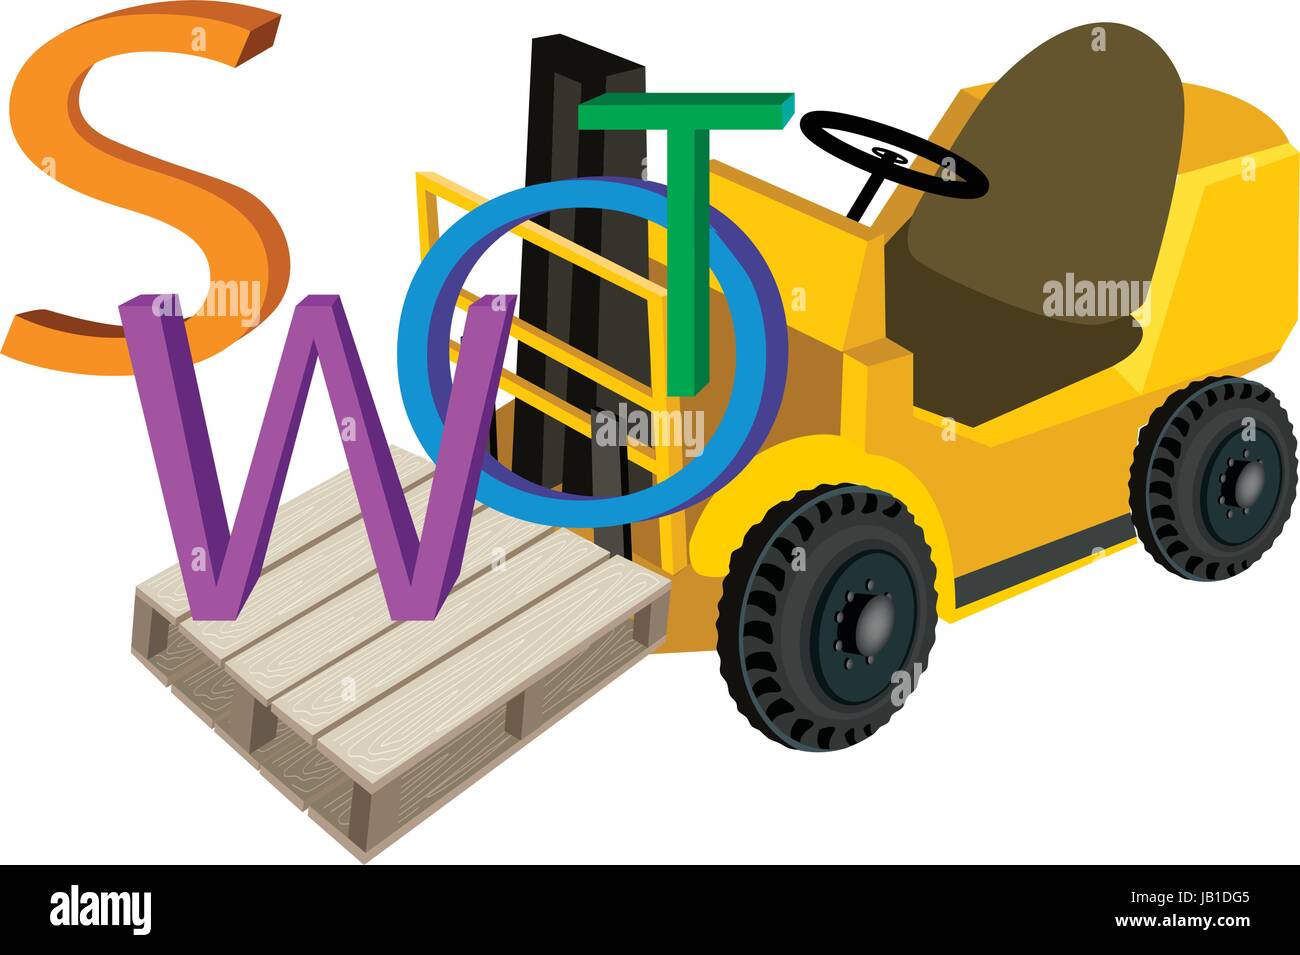 Fork Truck or Lift Truck Loading Word 'SWOT' A Structured Planning Method for Evaluate Strengths, Weaknesses, Opportunities and Threats Involved in Bu Stock Vector